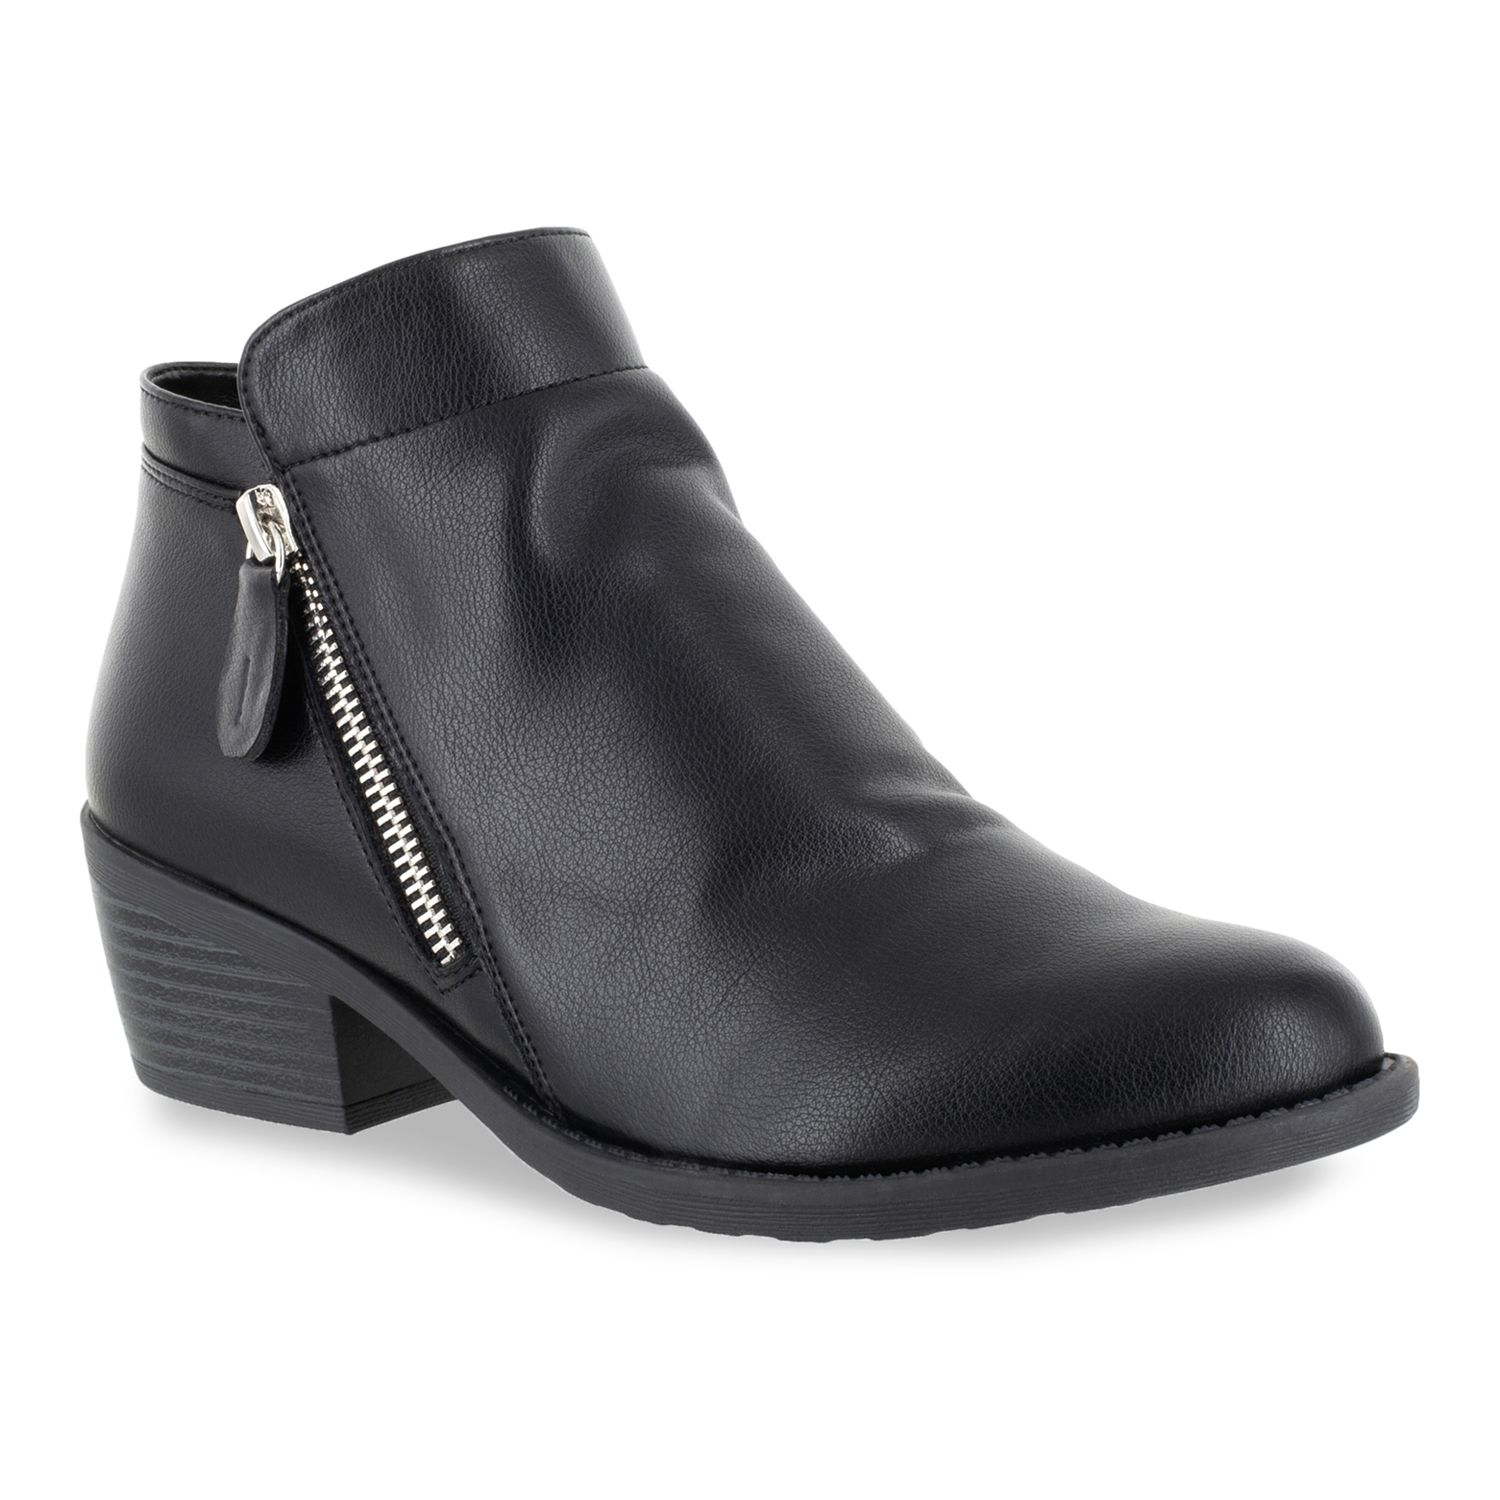 Image for Easy Street Gusto Women's Ankle Boots at Kohl's.